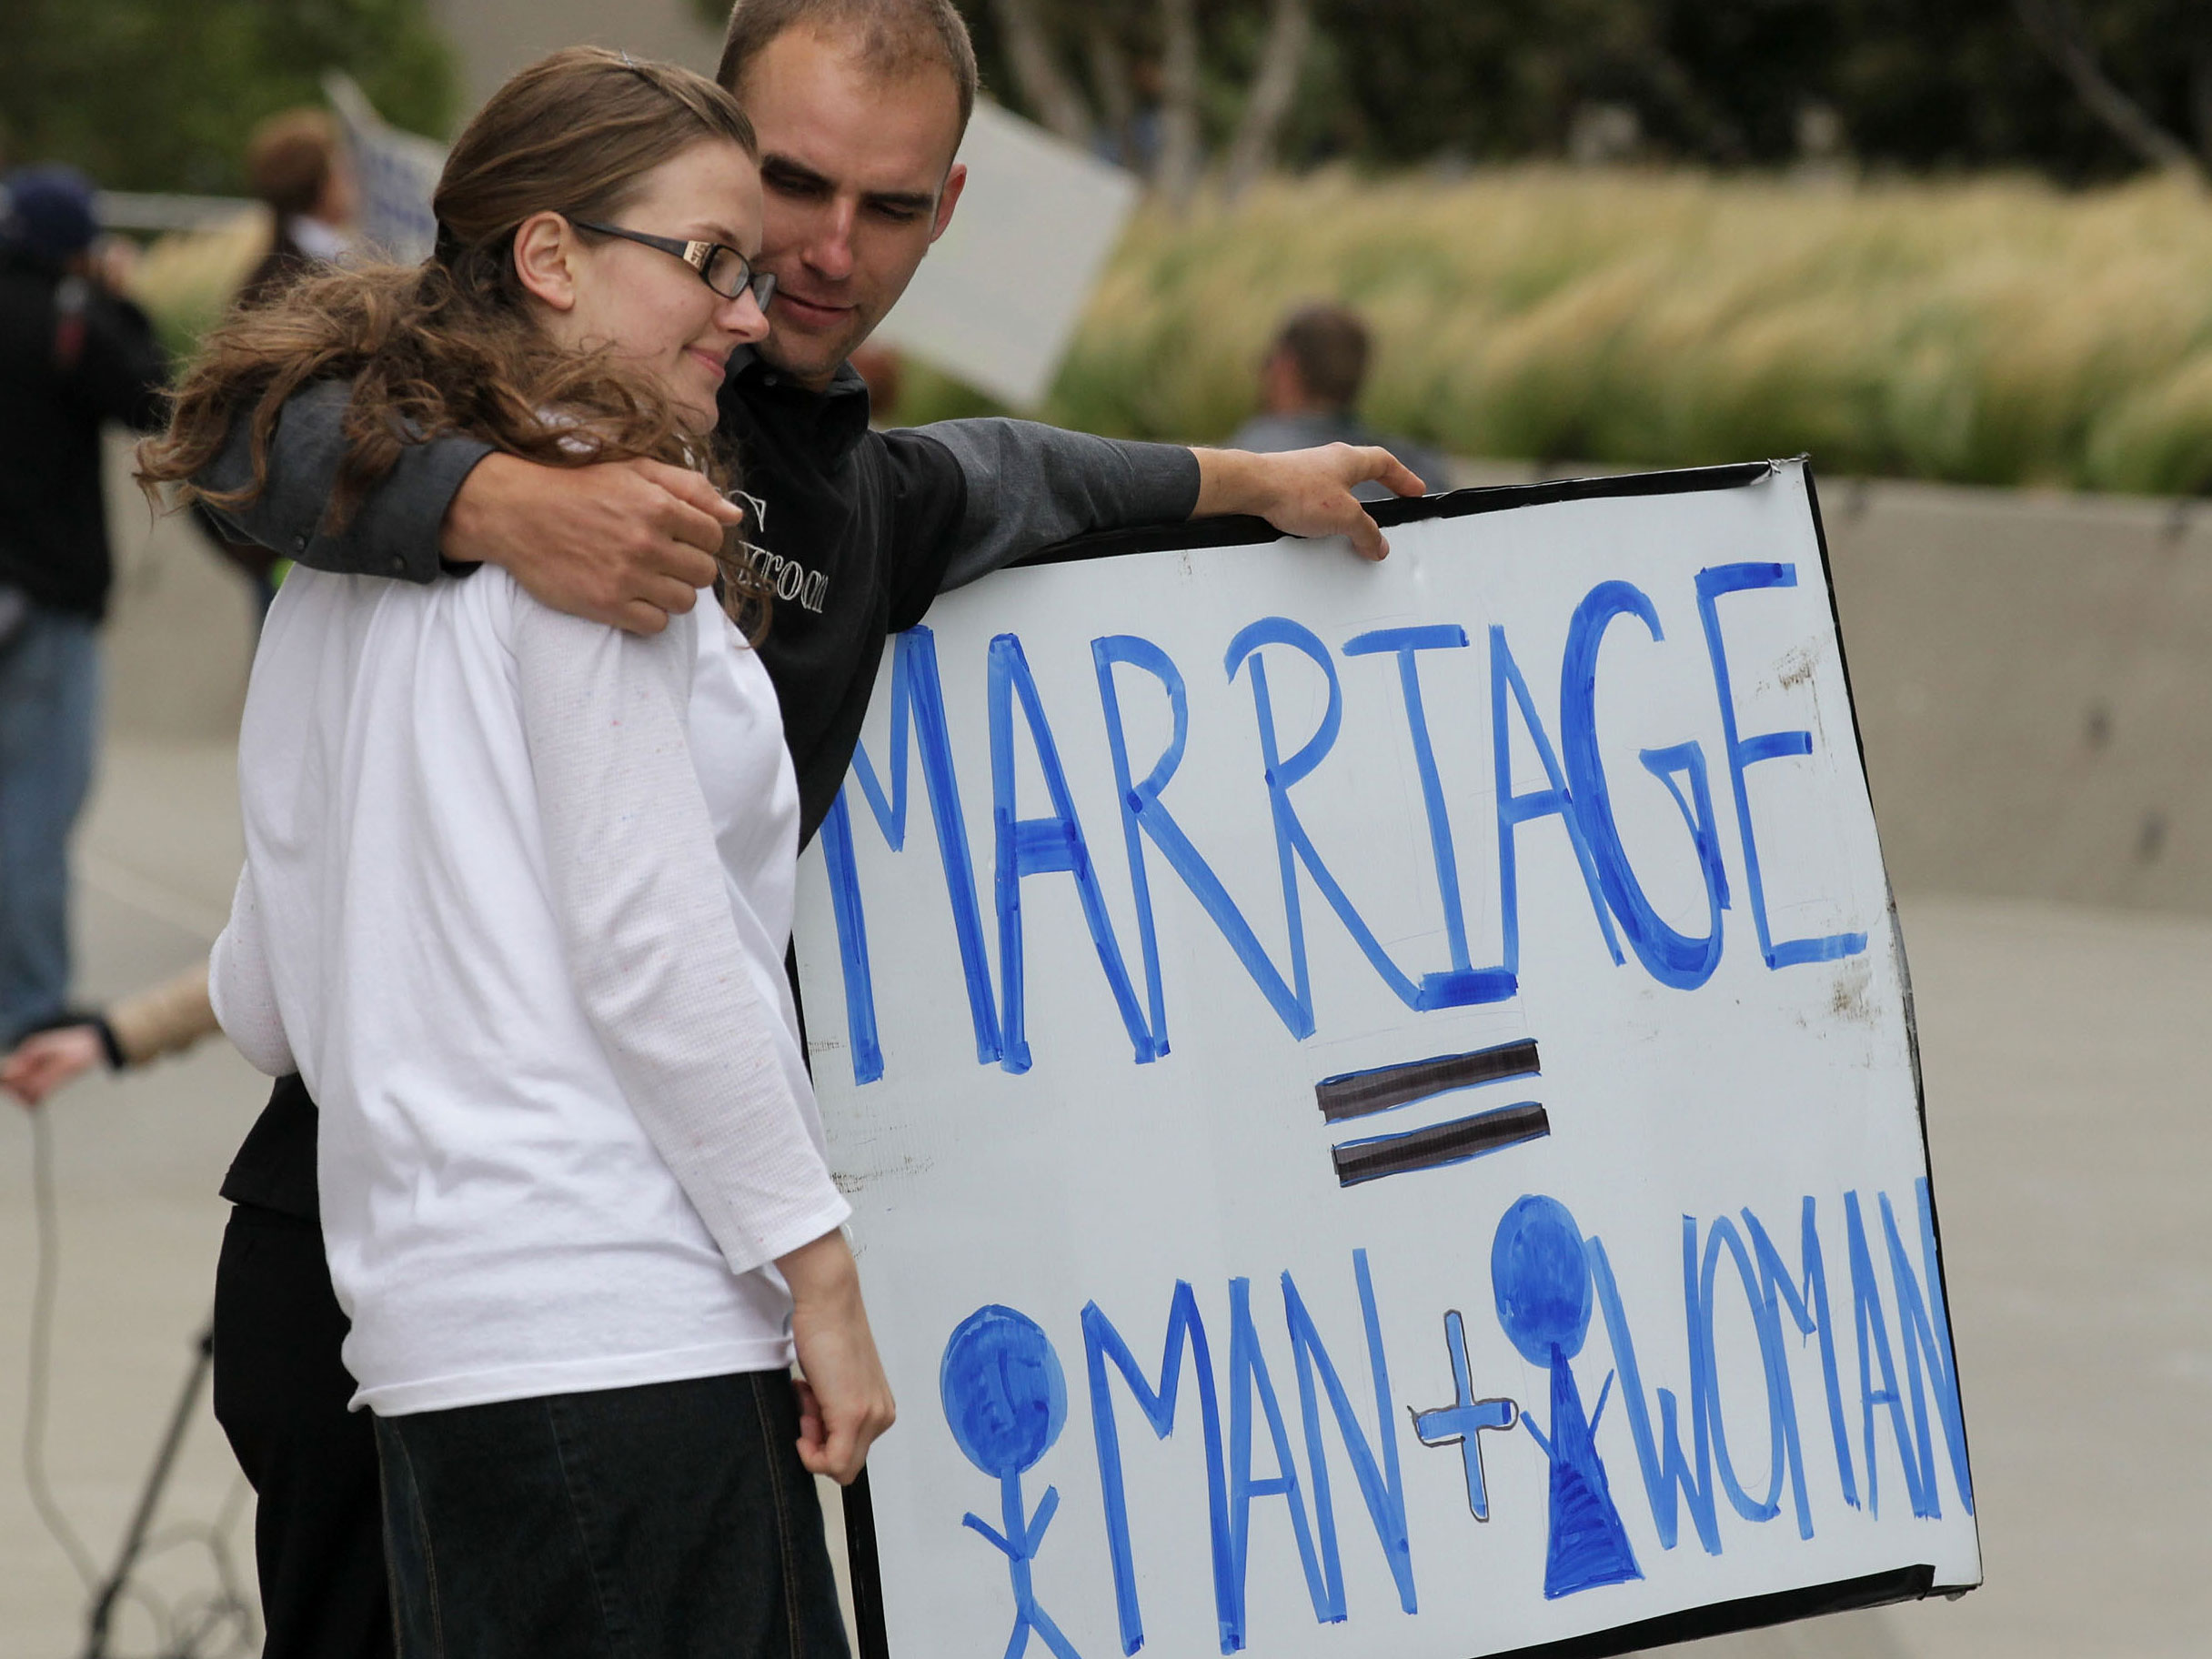 Gay marriage pros and cons debate